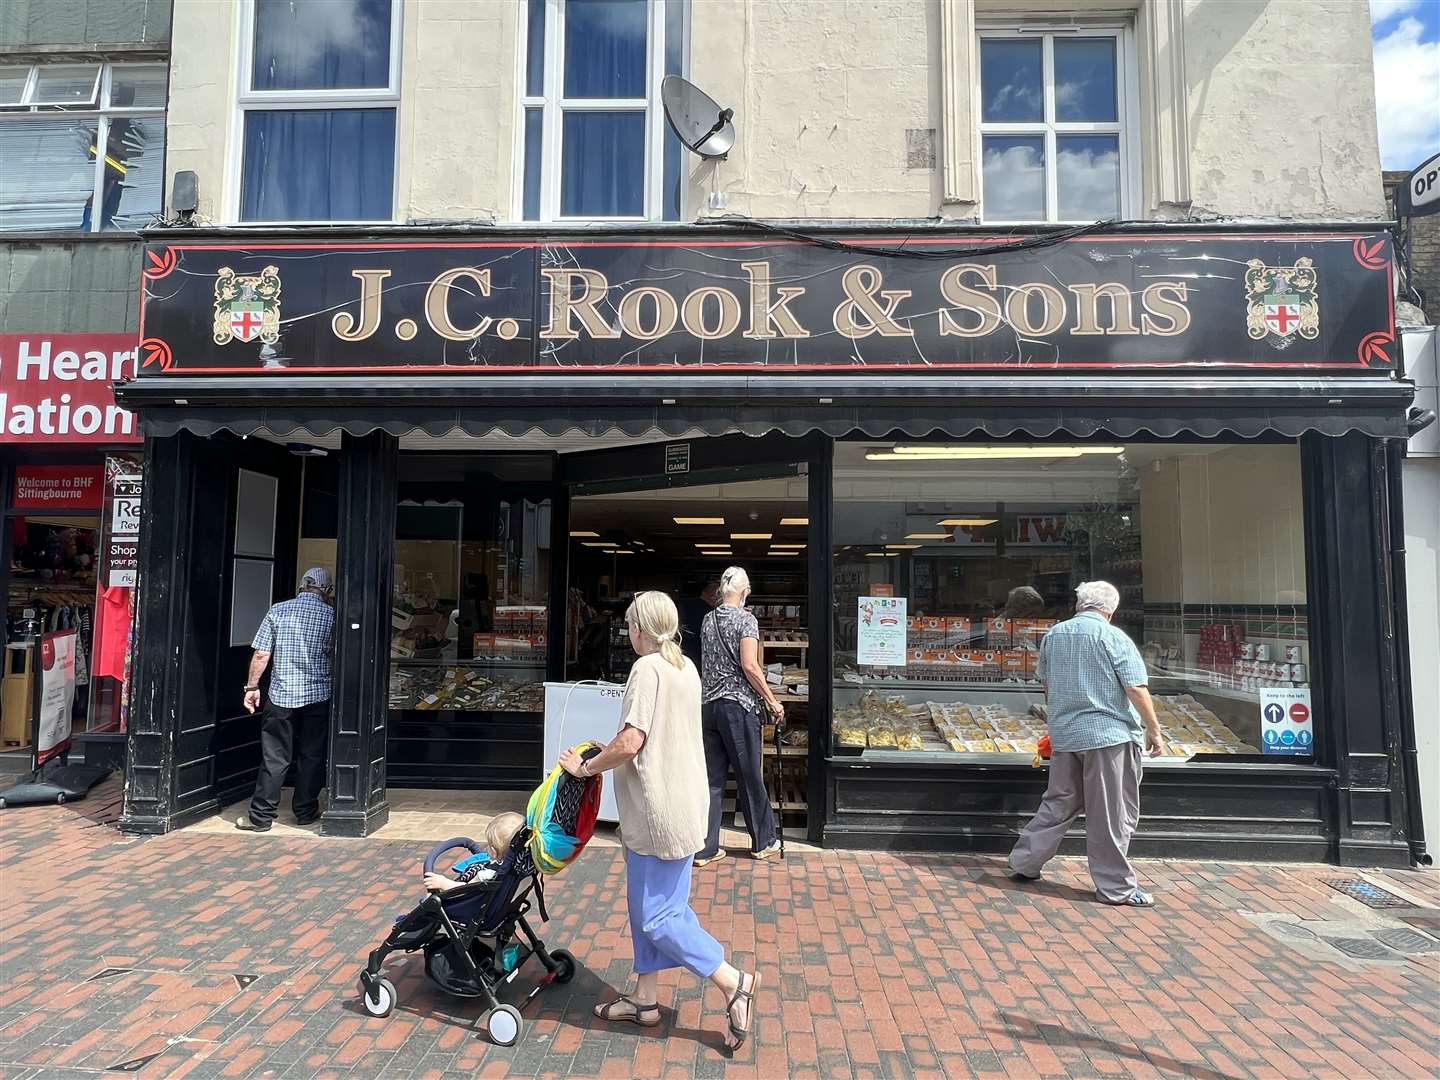 The Italian Store was in the old J.C. Rook and Sons Butcher's unit